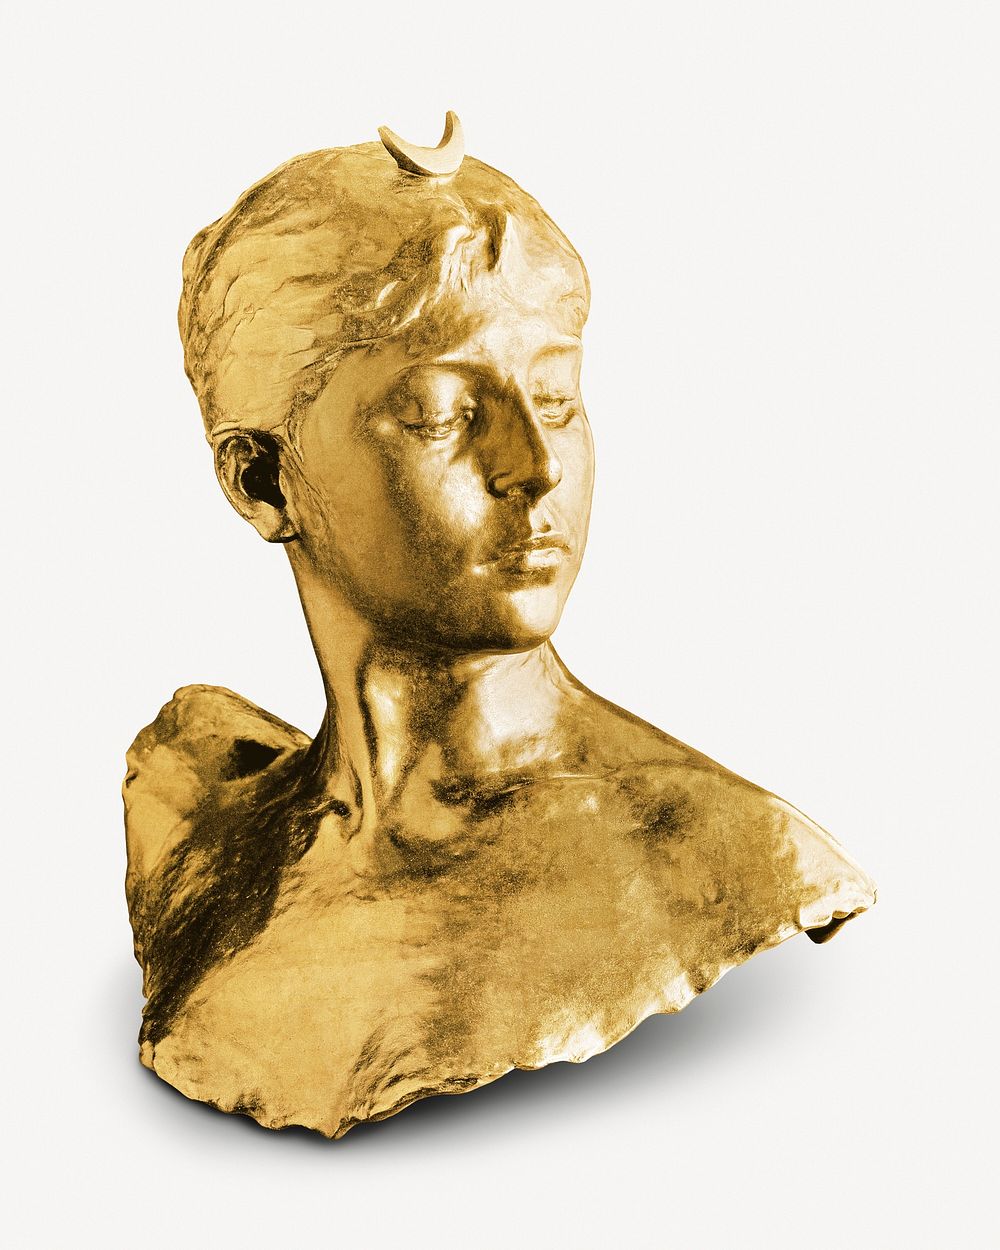 Aesthetic gold woman sculpture psd. Remixed by rawpixel.